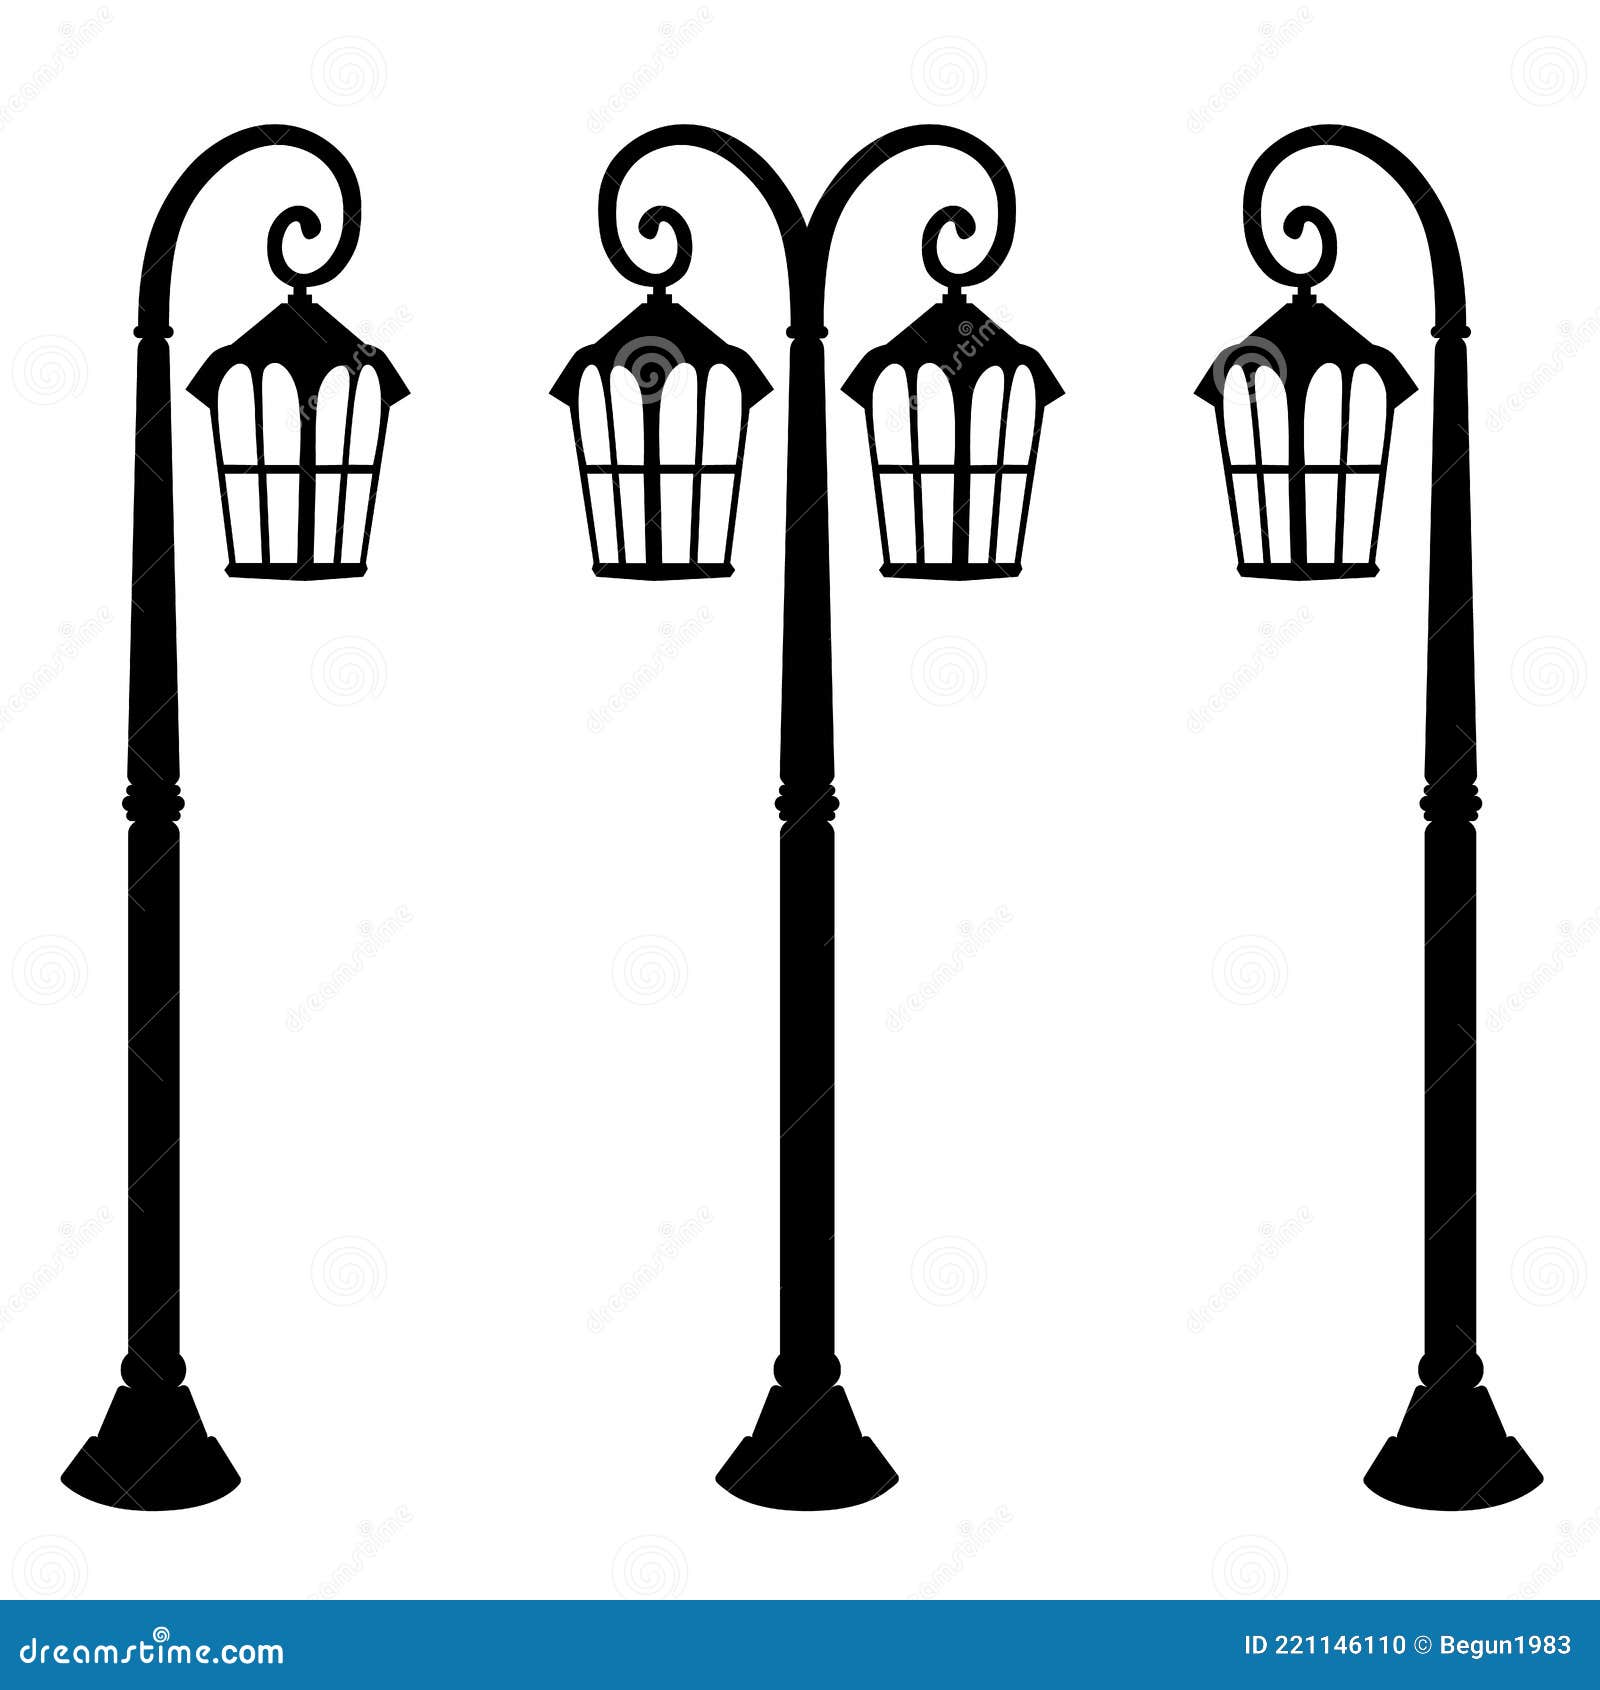 Vintage Street Lamp On A Pole In Vectorstreet Lamp Logo Side View